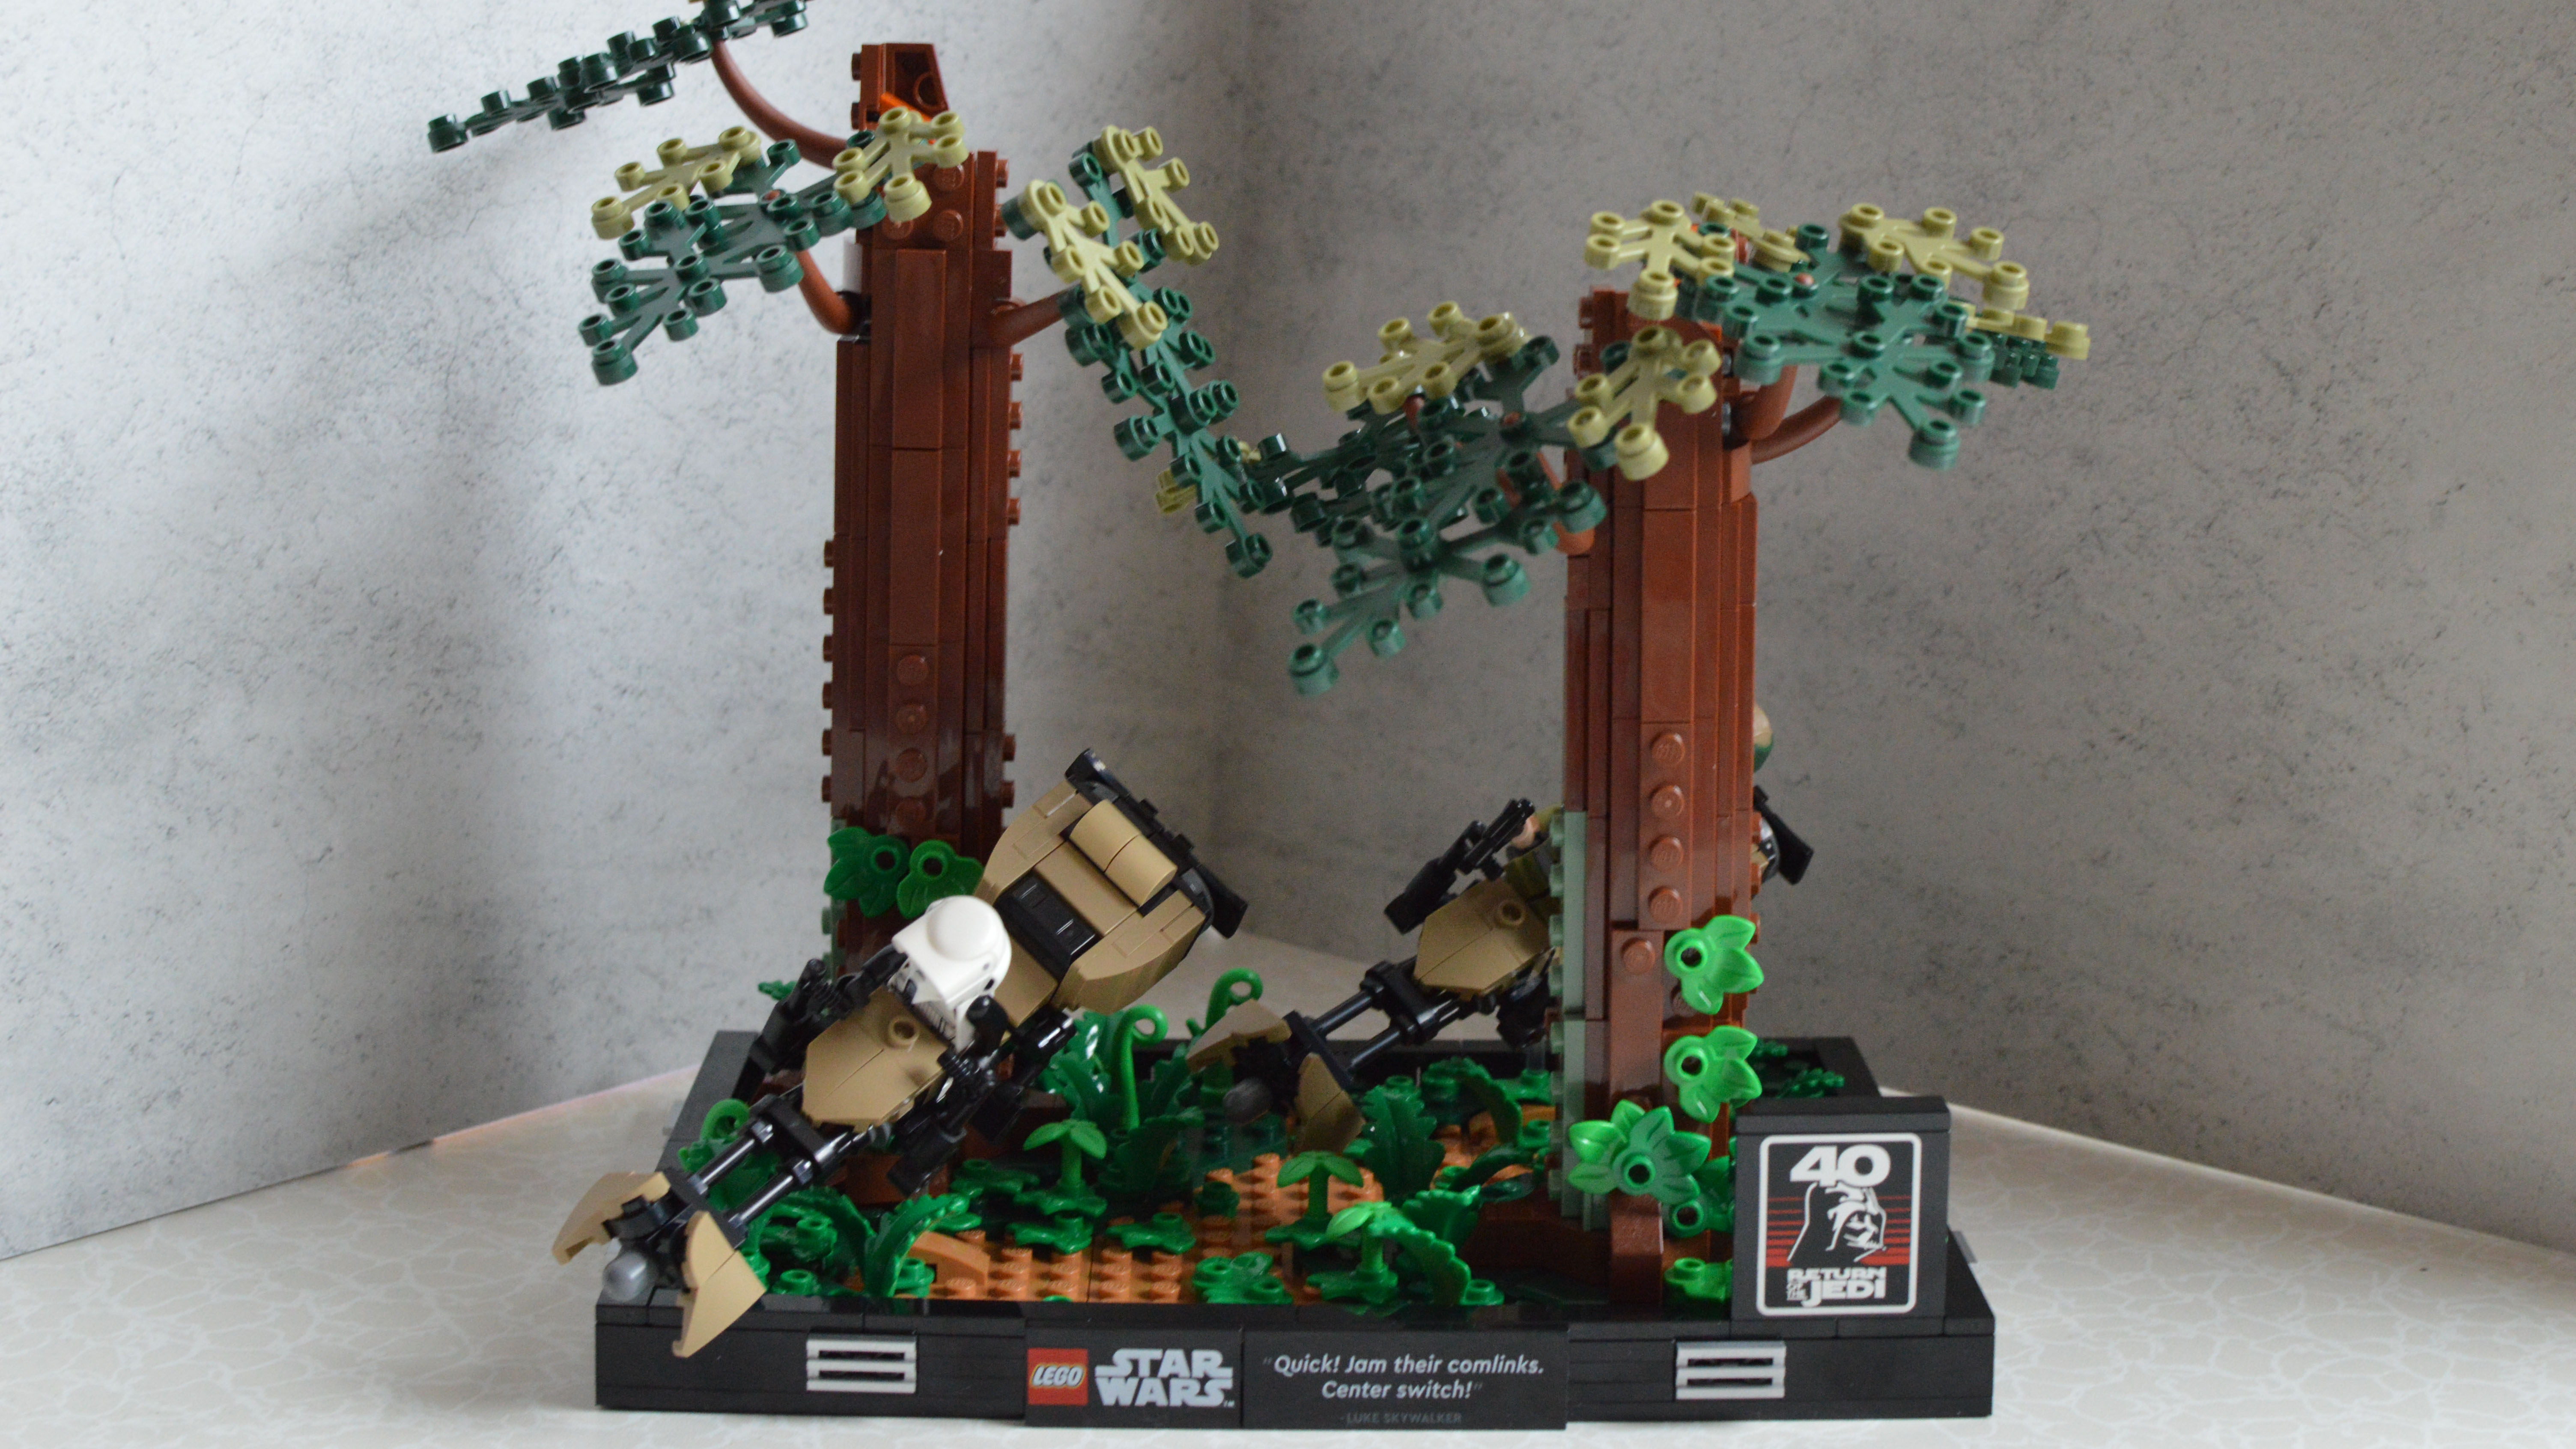 New Lego Star Wars Diorama sets are slices of the films brought to